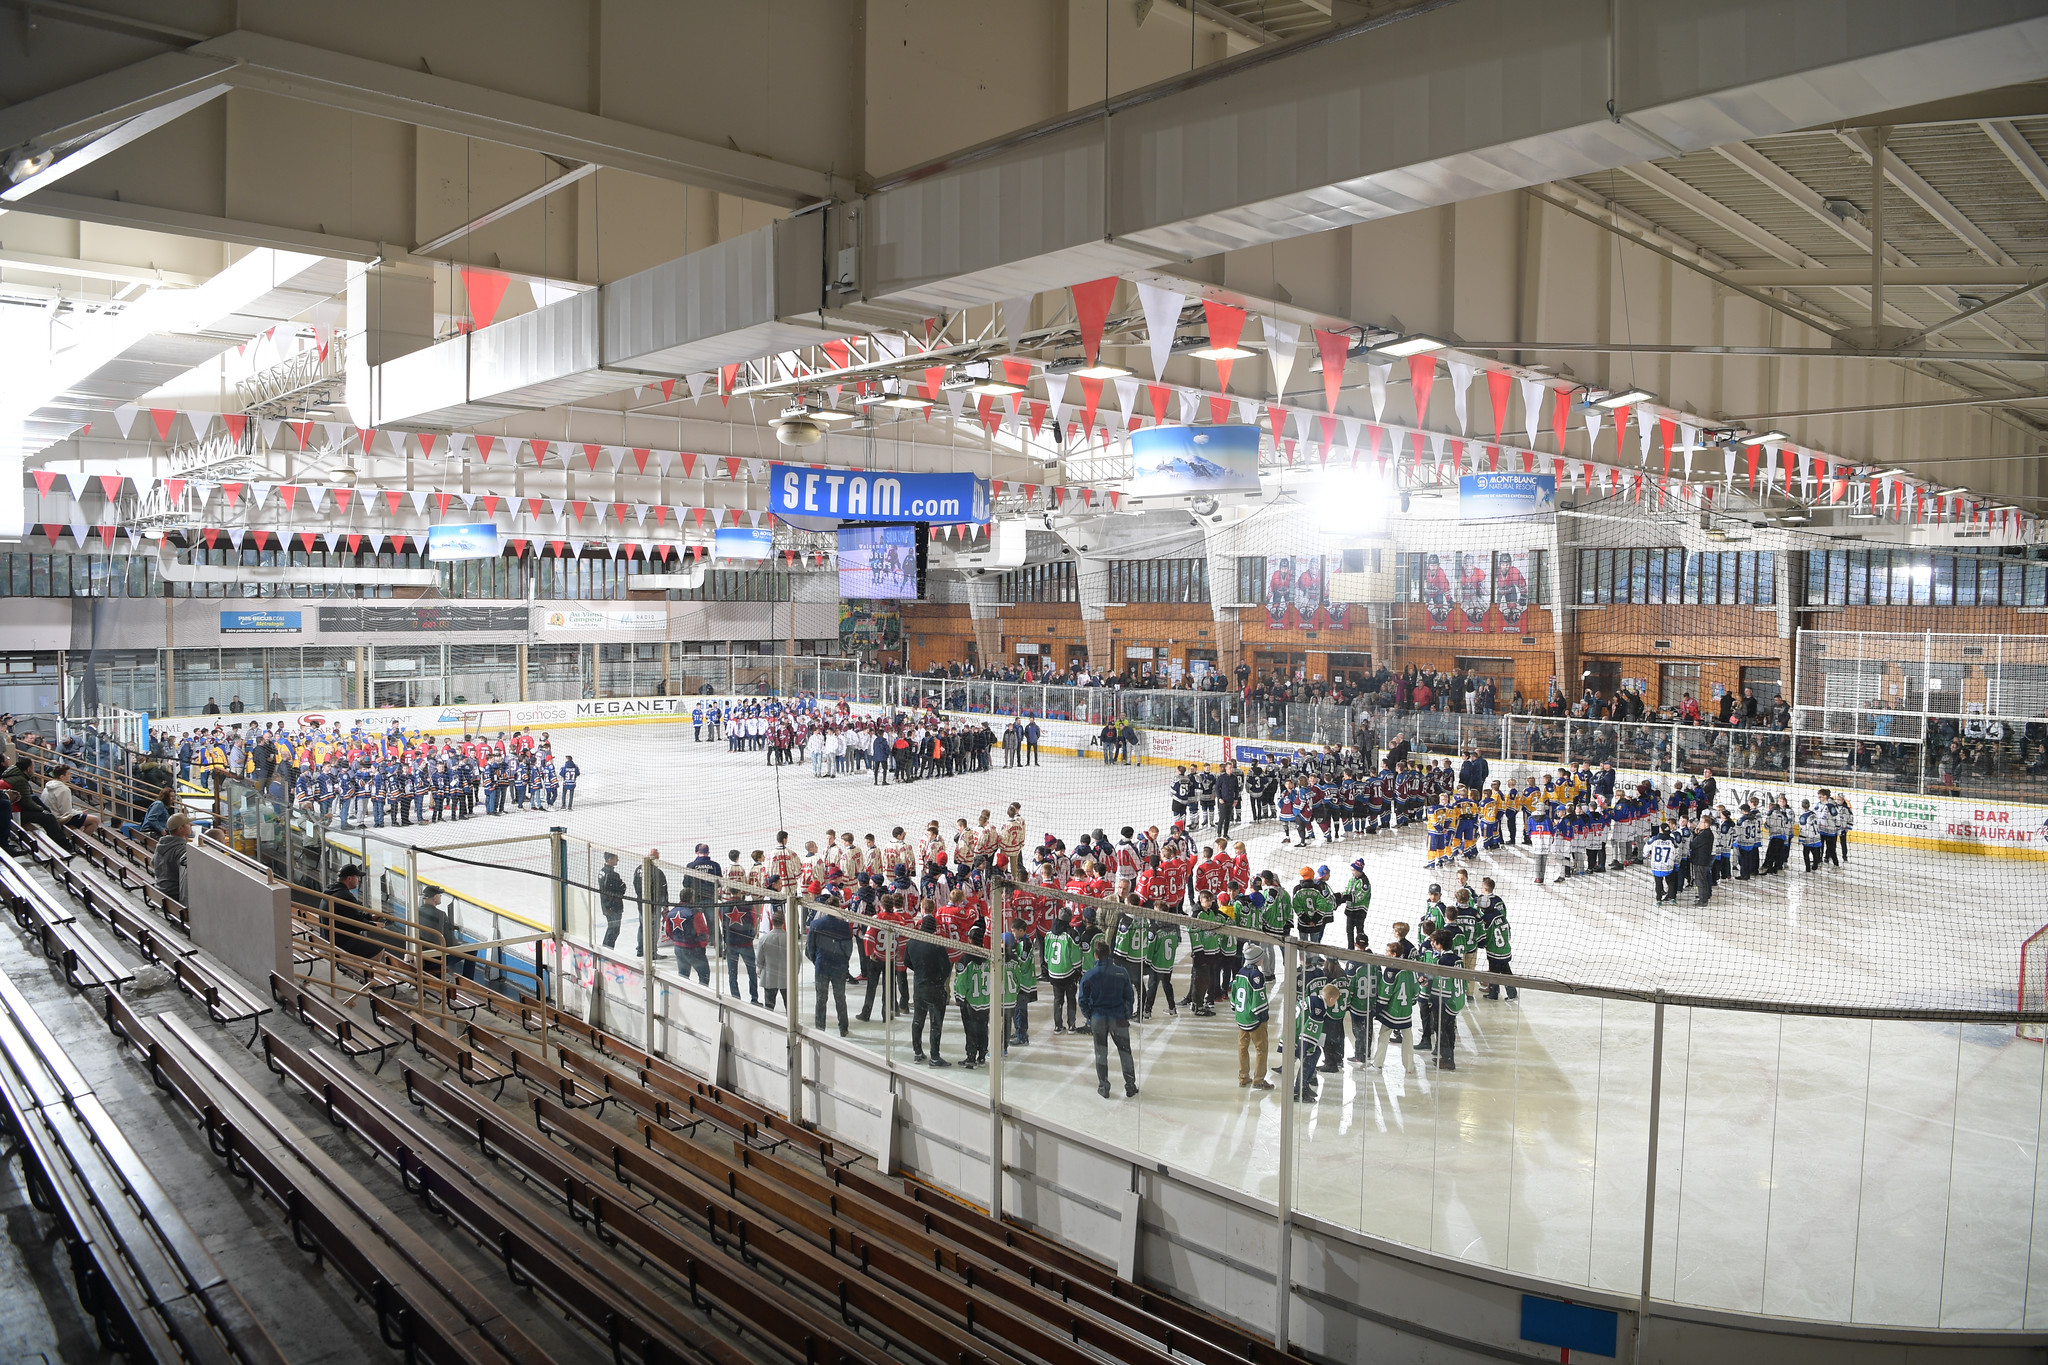 A wide angle shot of an ice rink with various teams on the ice for opening ceremonies at the World Selects Invitational Trophy Tournament.